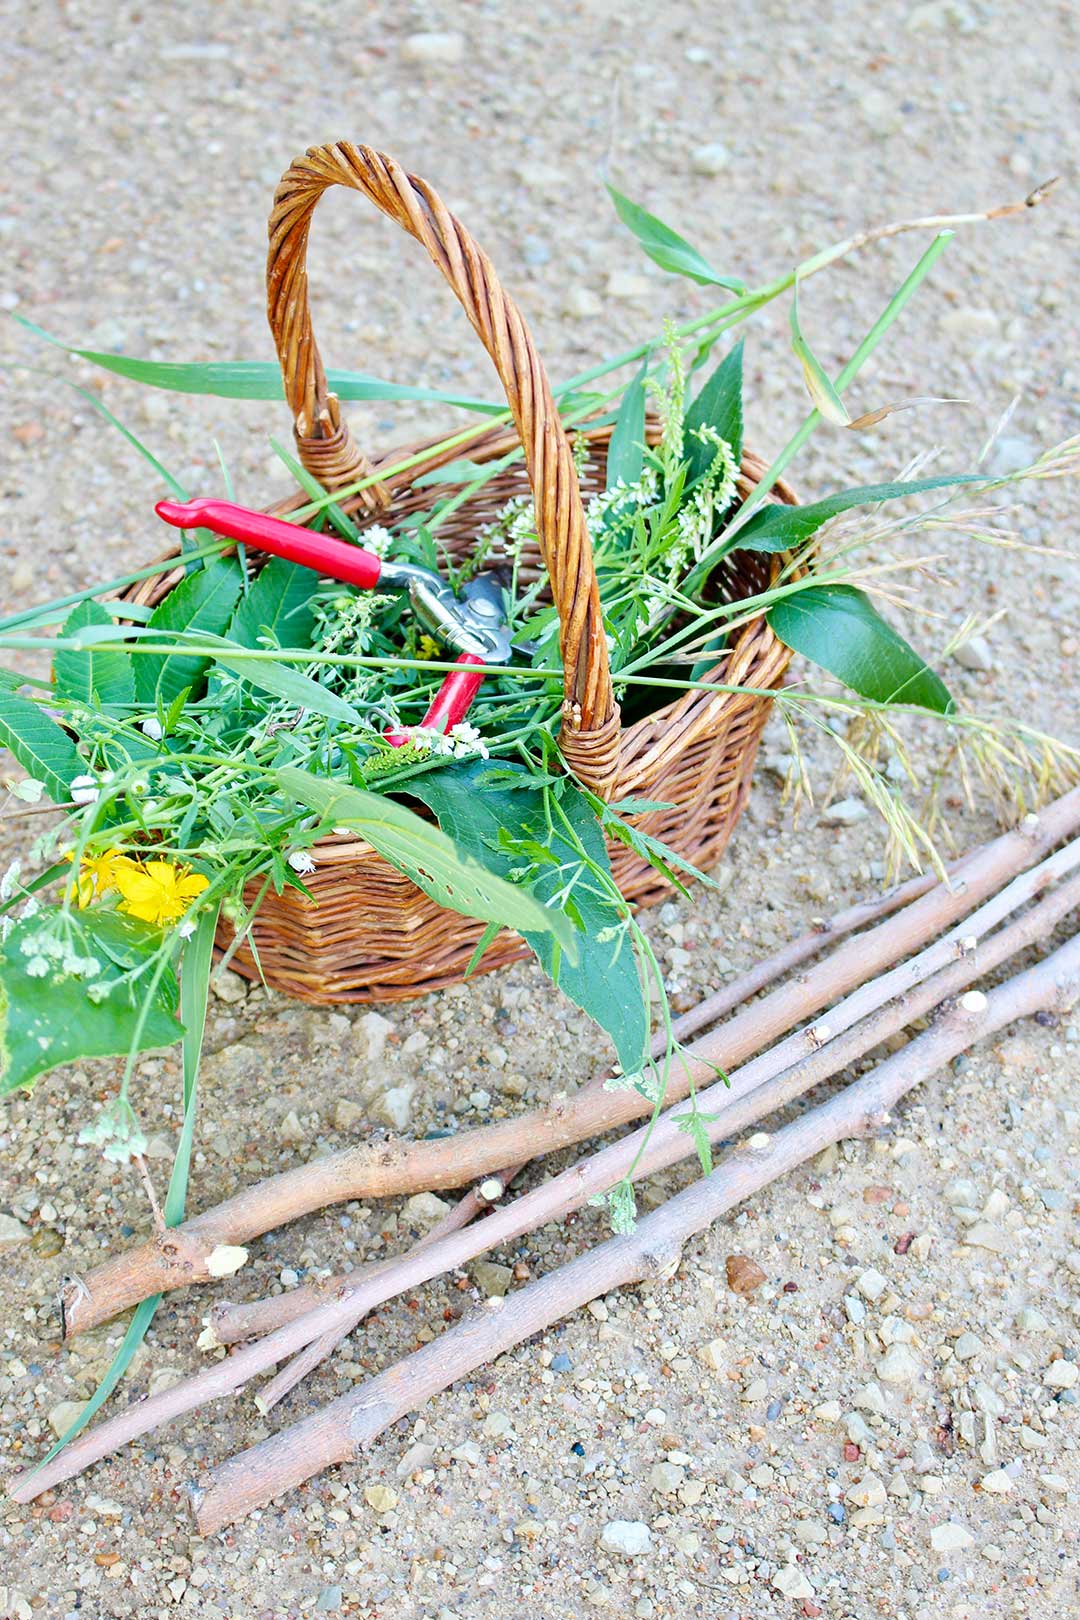 Basket of wild nature clippings and a pile of sticks resting on a gravel ground.